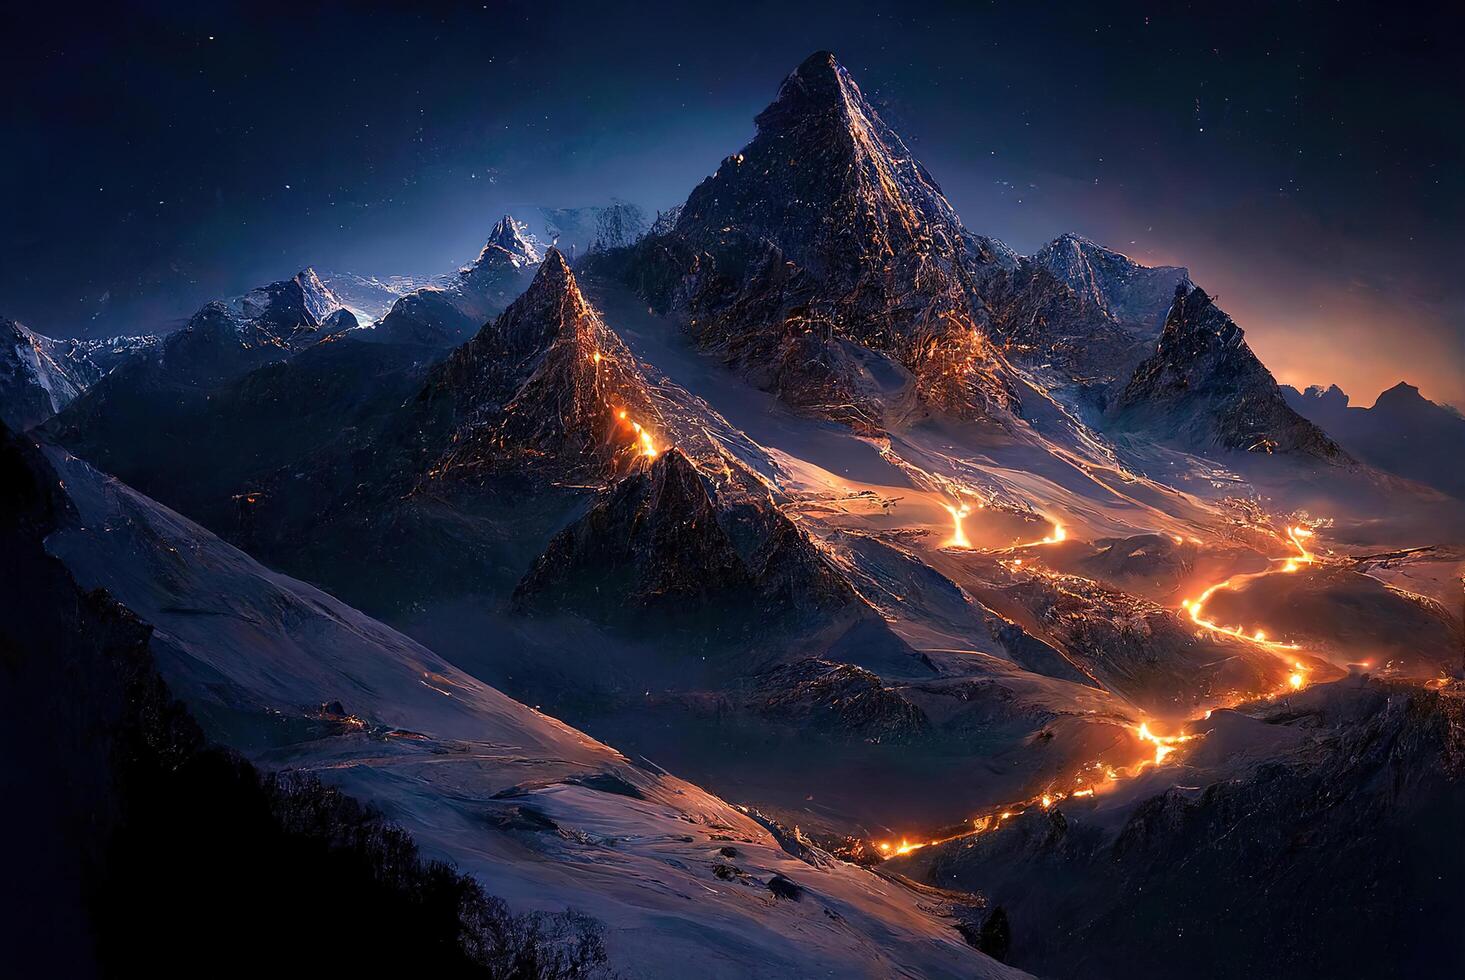 Night winter mountains landscape with lights. photo